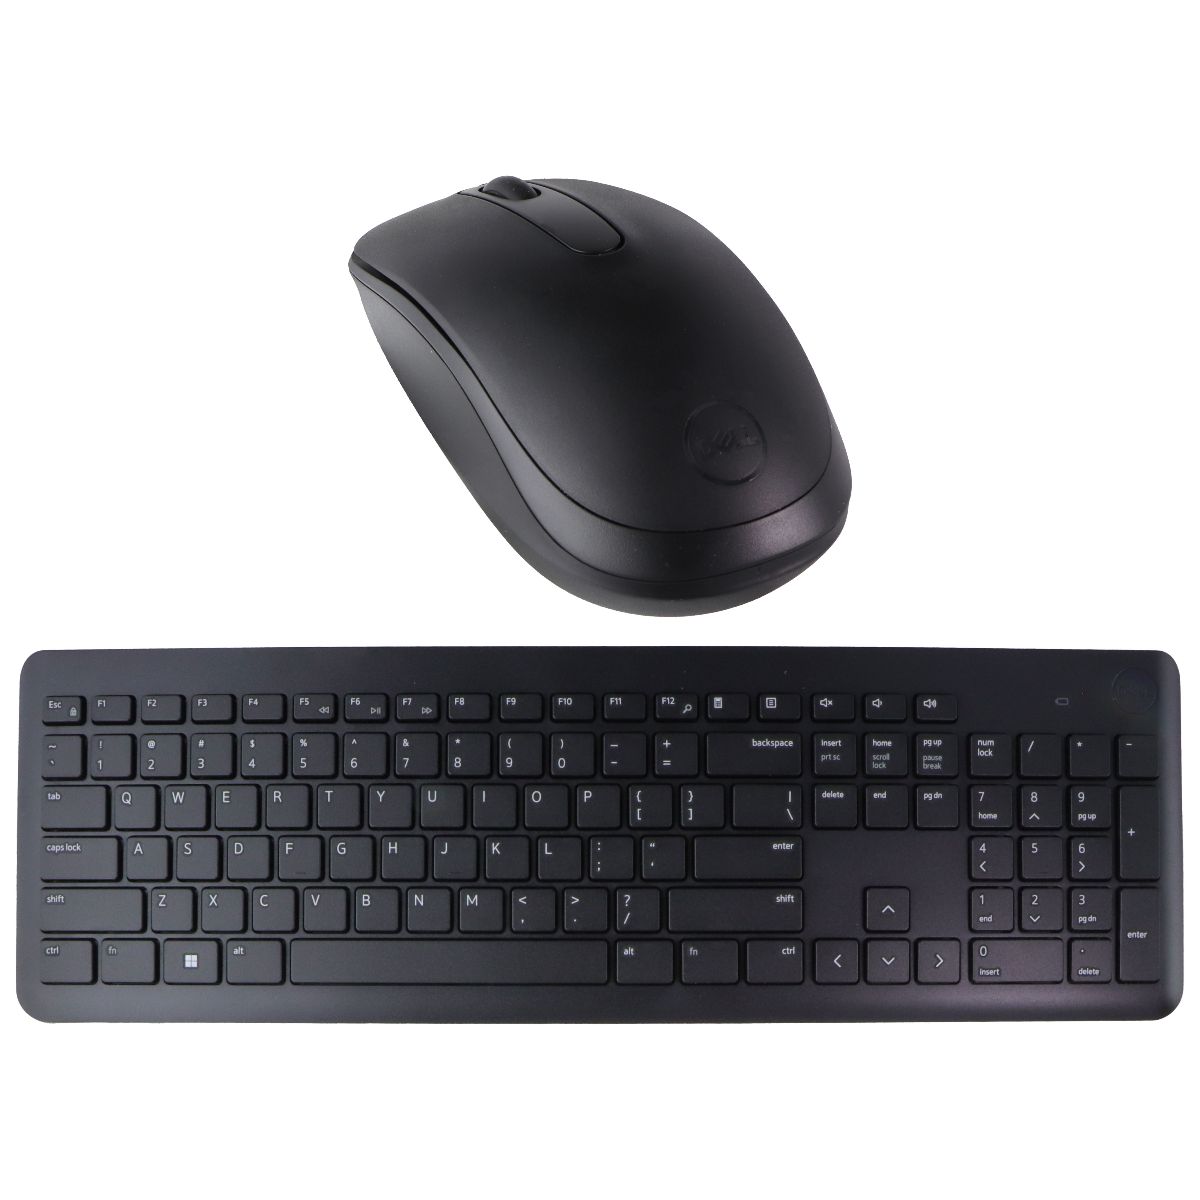 Dell Wireless Keyboard and Mouse with USB Wireless Receiver - Black (KM3322W)